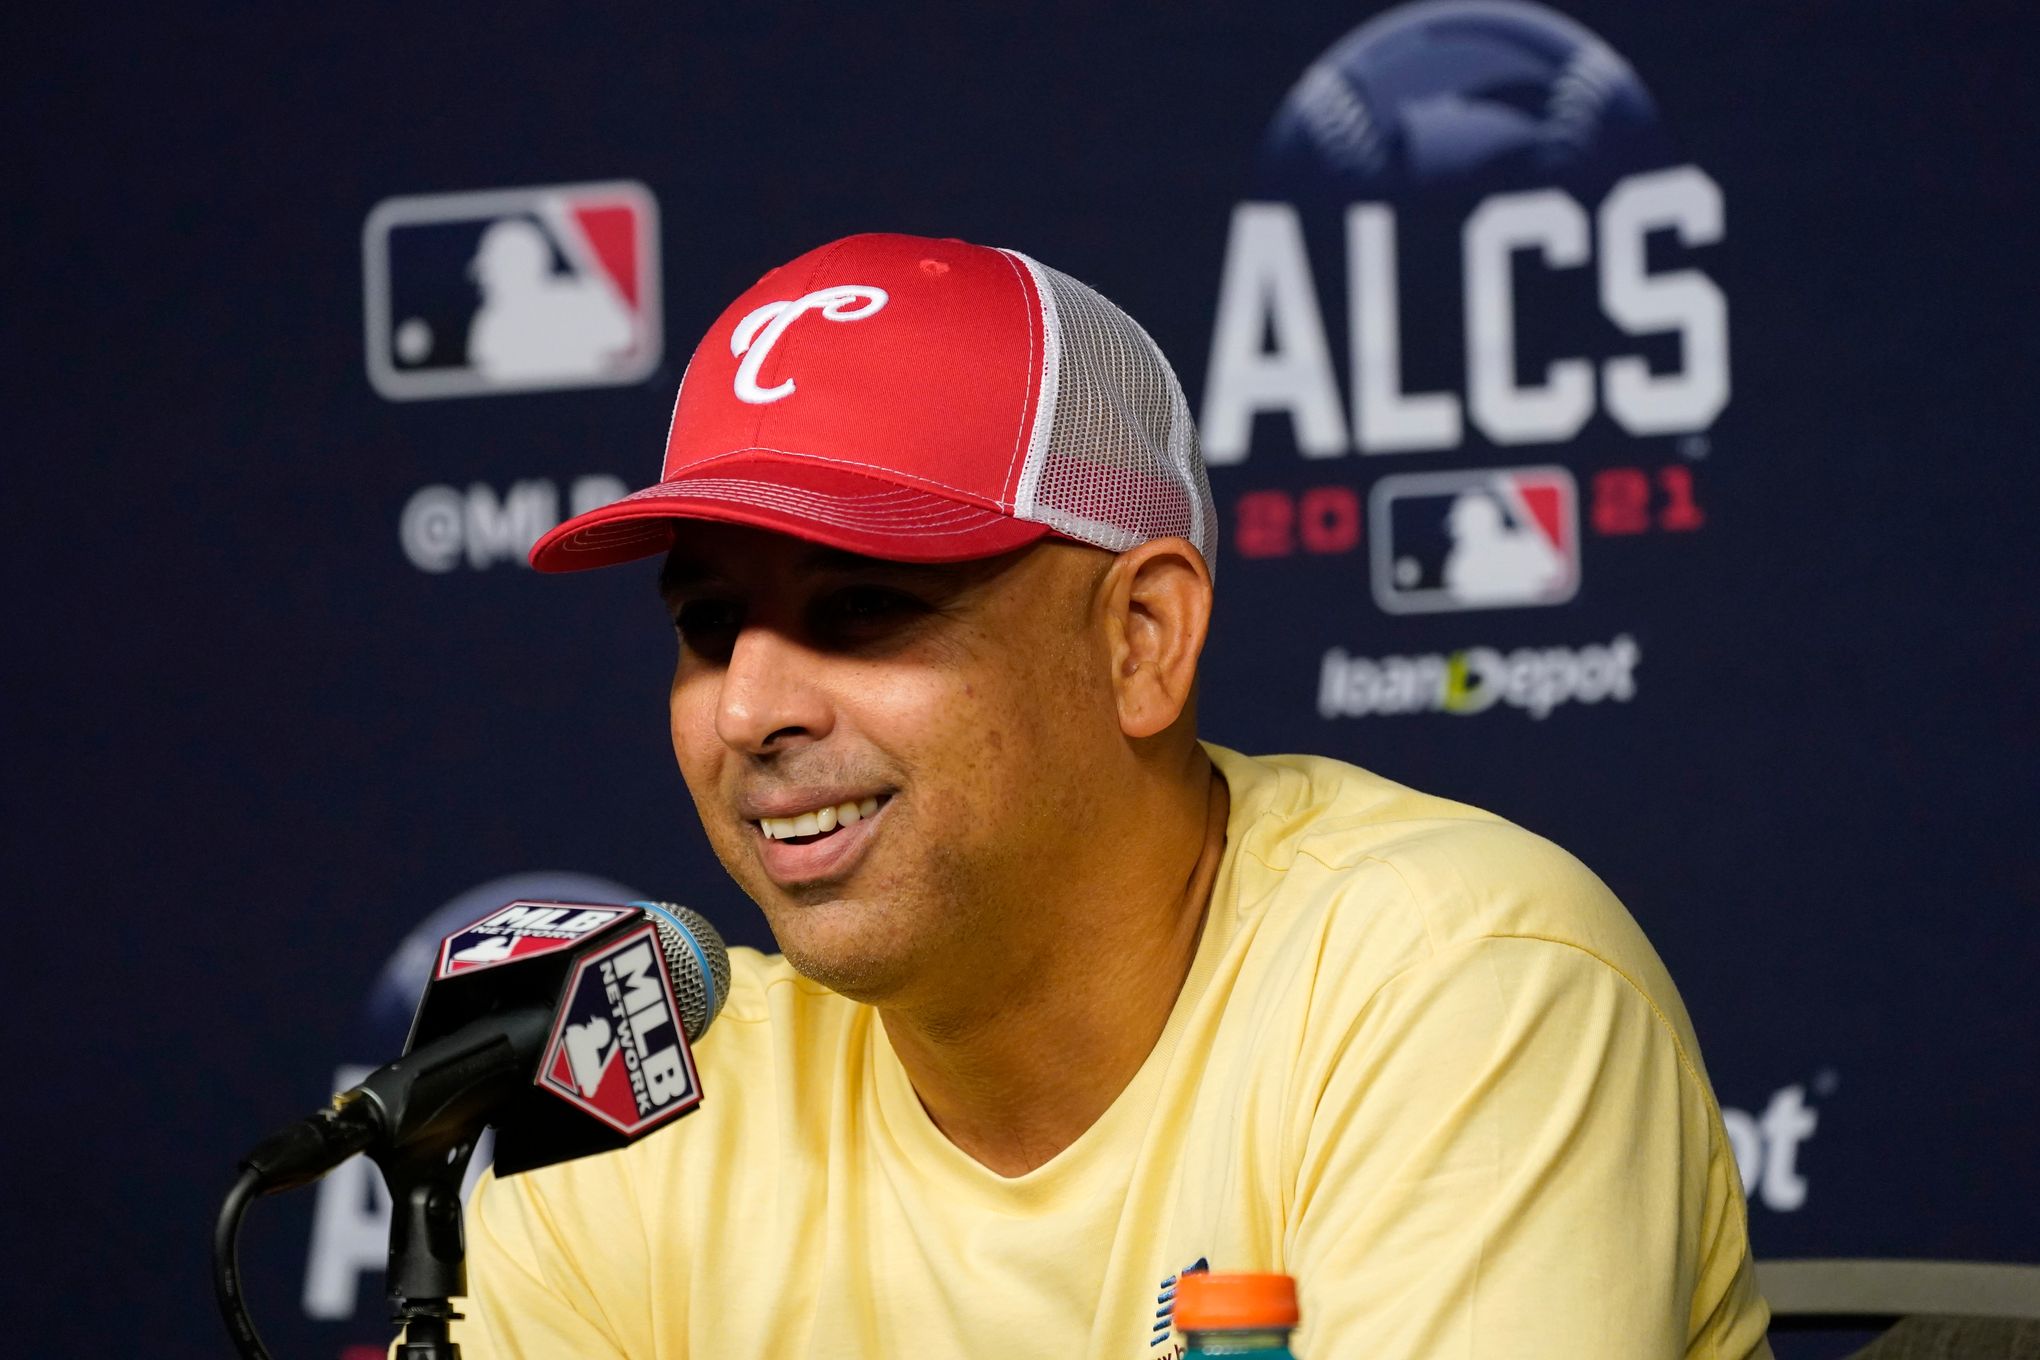 Red Sox Bring Back Cora, Rehiring Manager From 2018 Title - Bloomberg